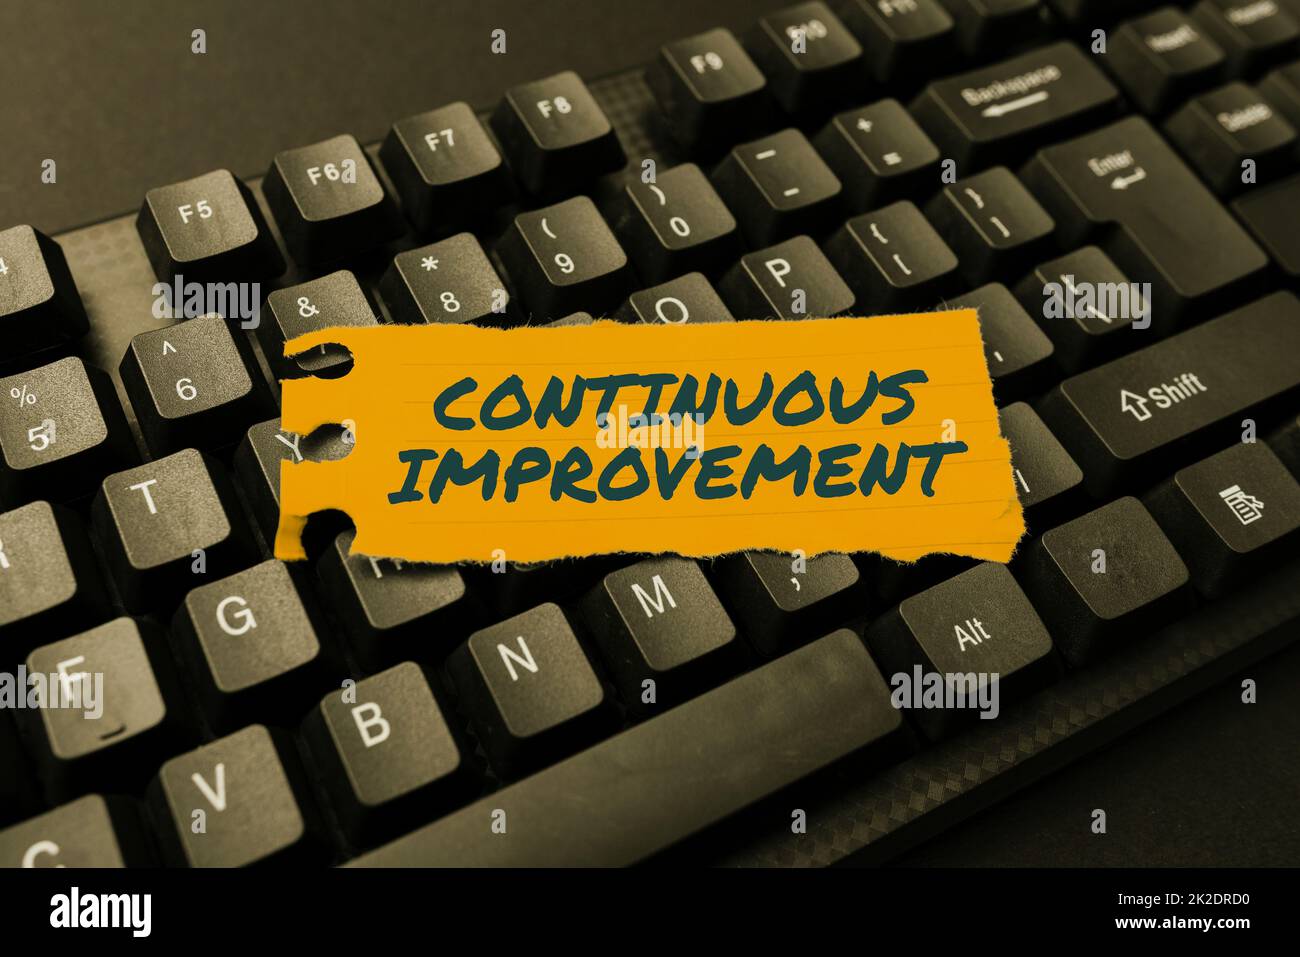 Conceptual caption Continuous Improvement. Business overview making small consistent improvements over time Typing New Edition Of Informational Ebook, Creating Fresh Website Content Stock Photo